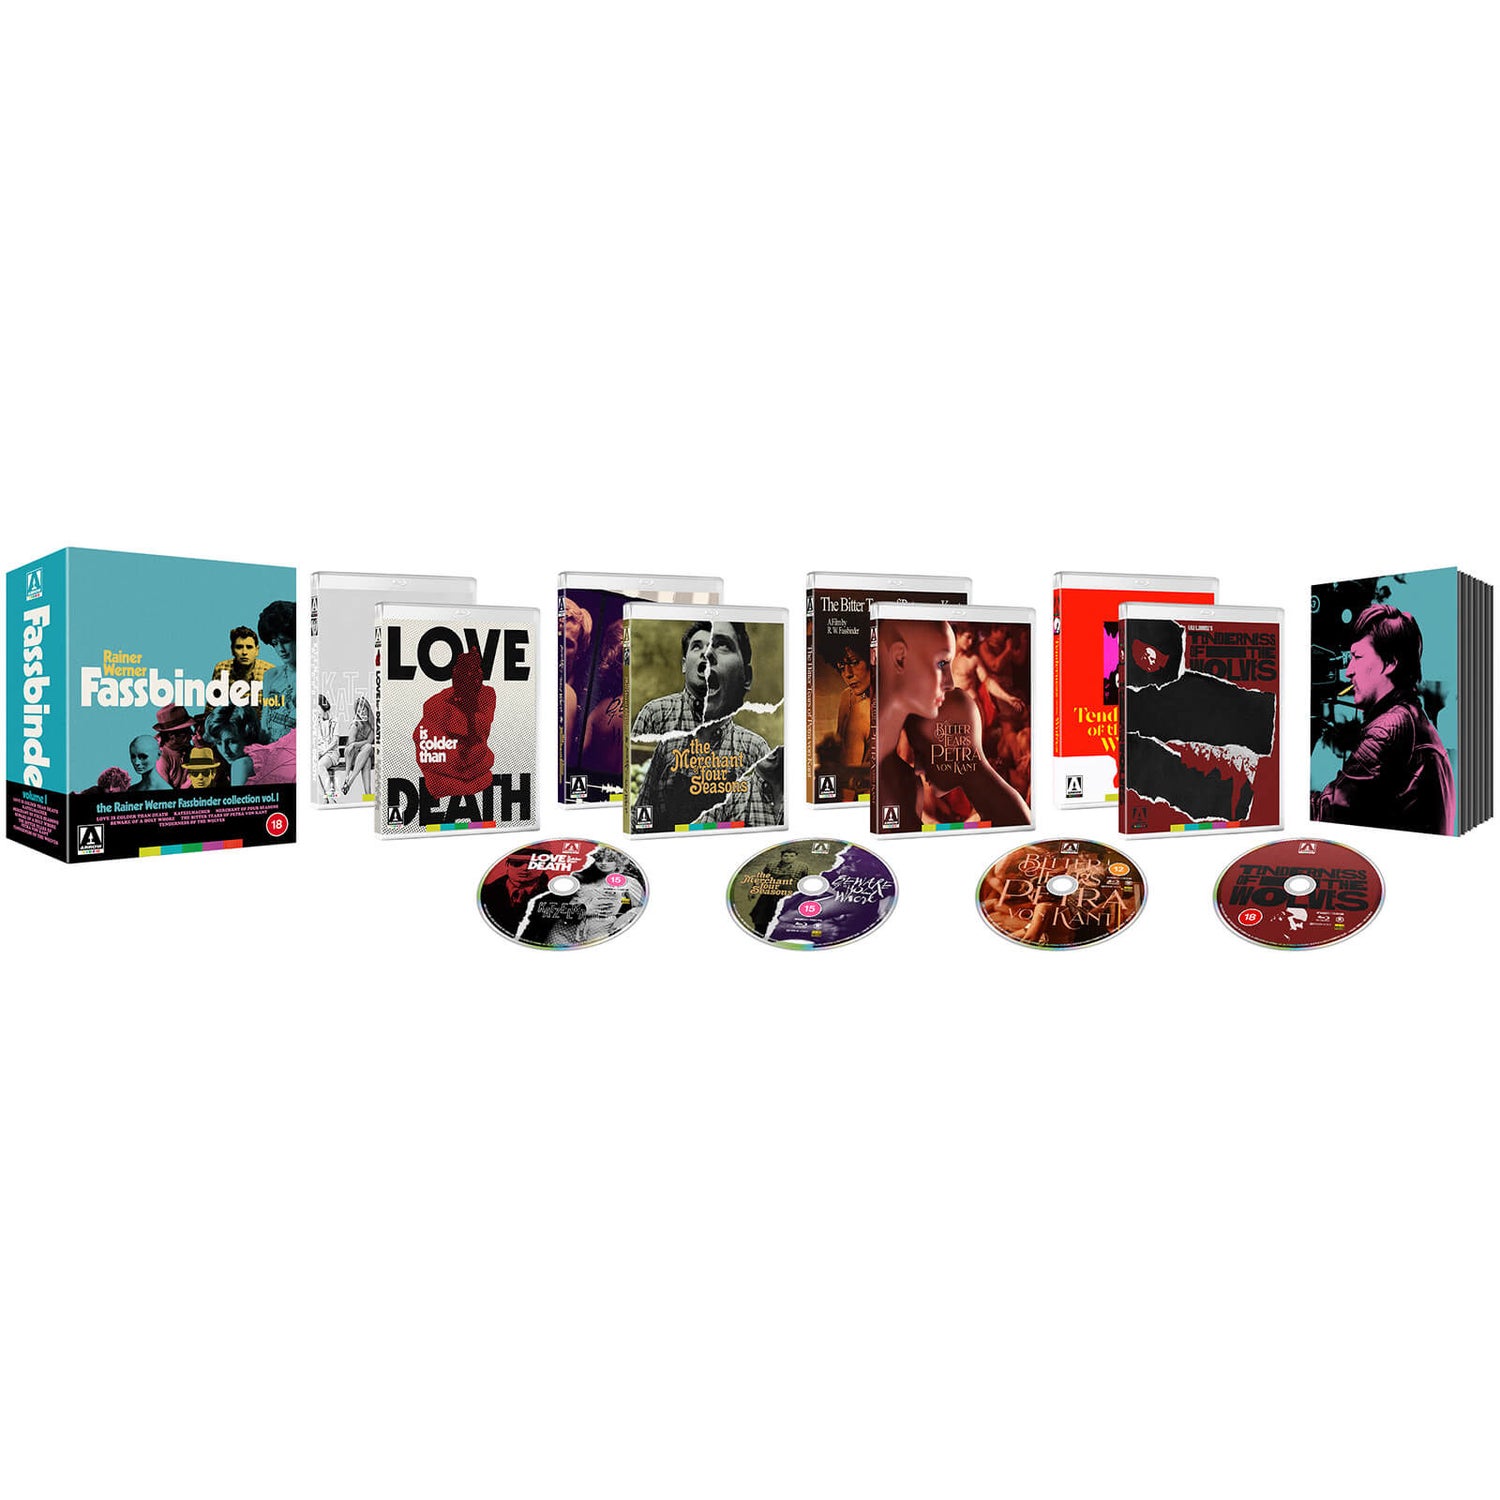 The Rainer Werner Fassbinder Collection Vol. 1 Limited Edition Blu-ray